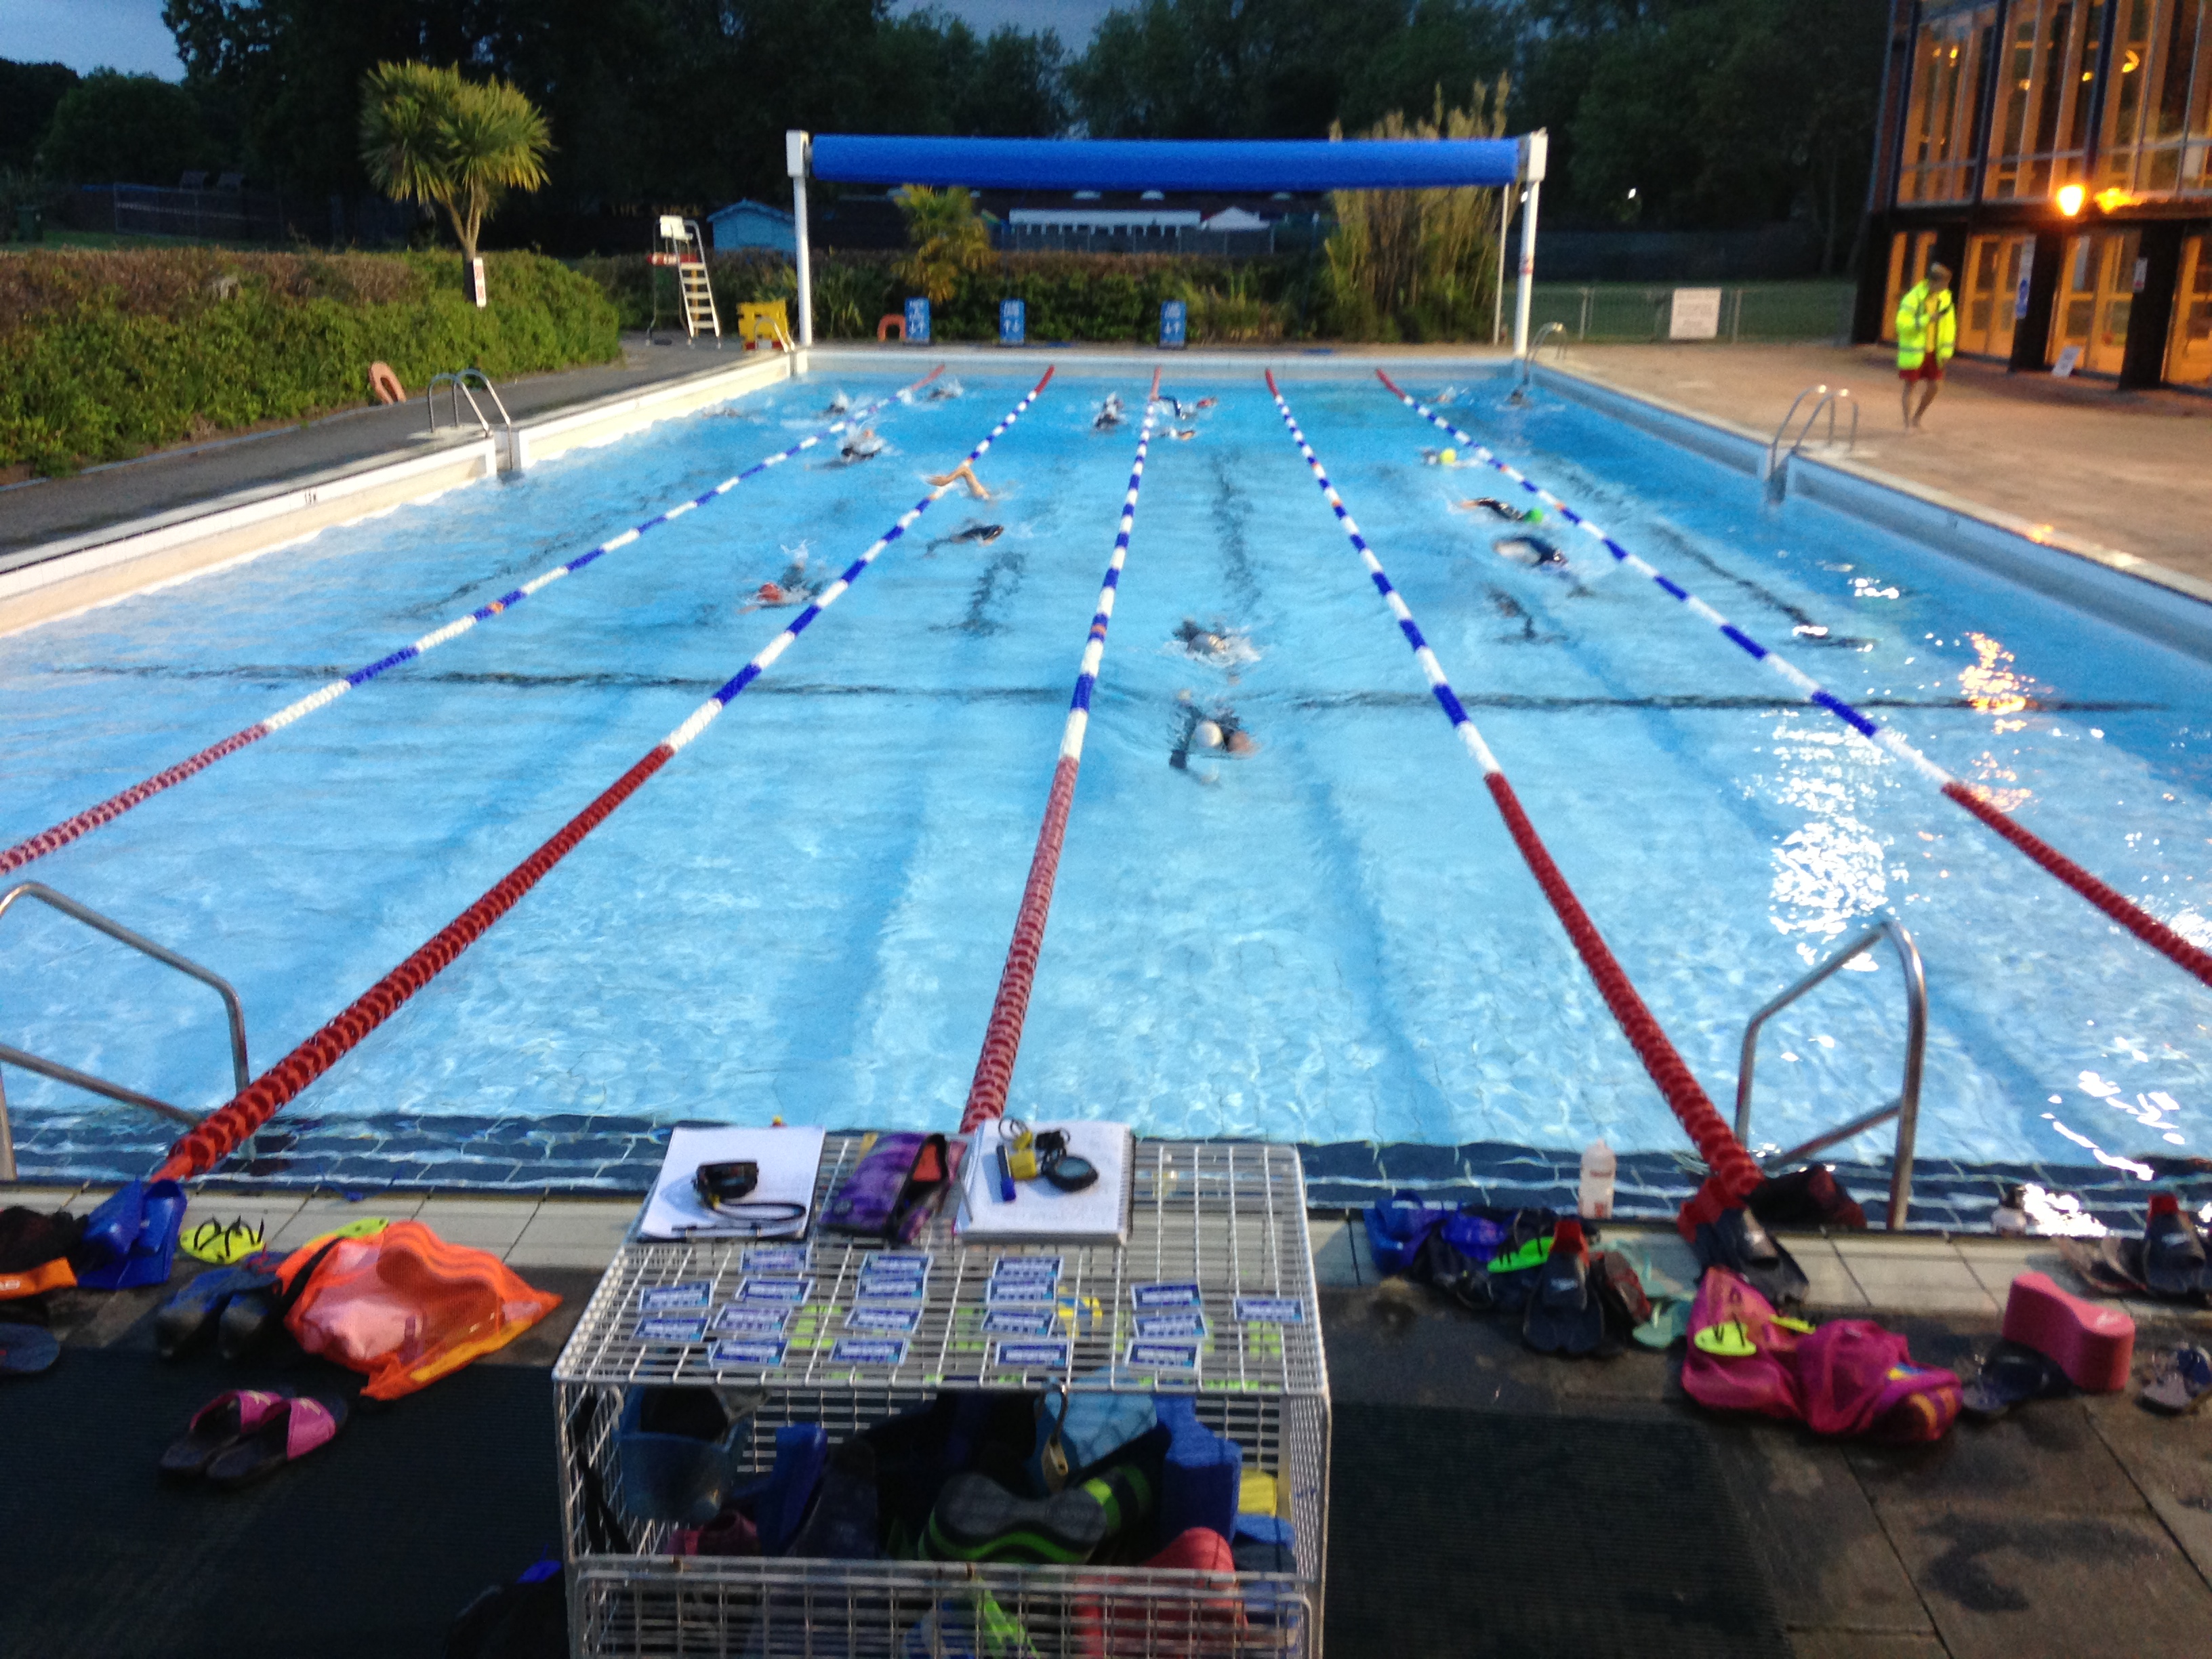 Outdoor pool set up for training